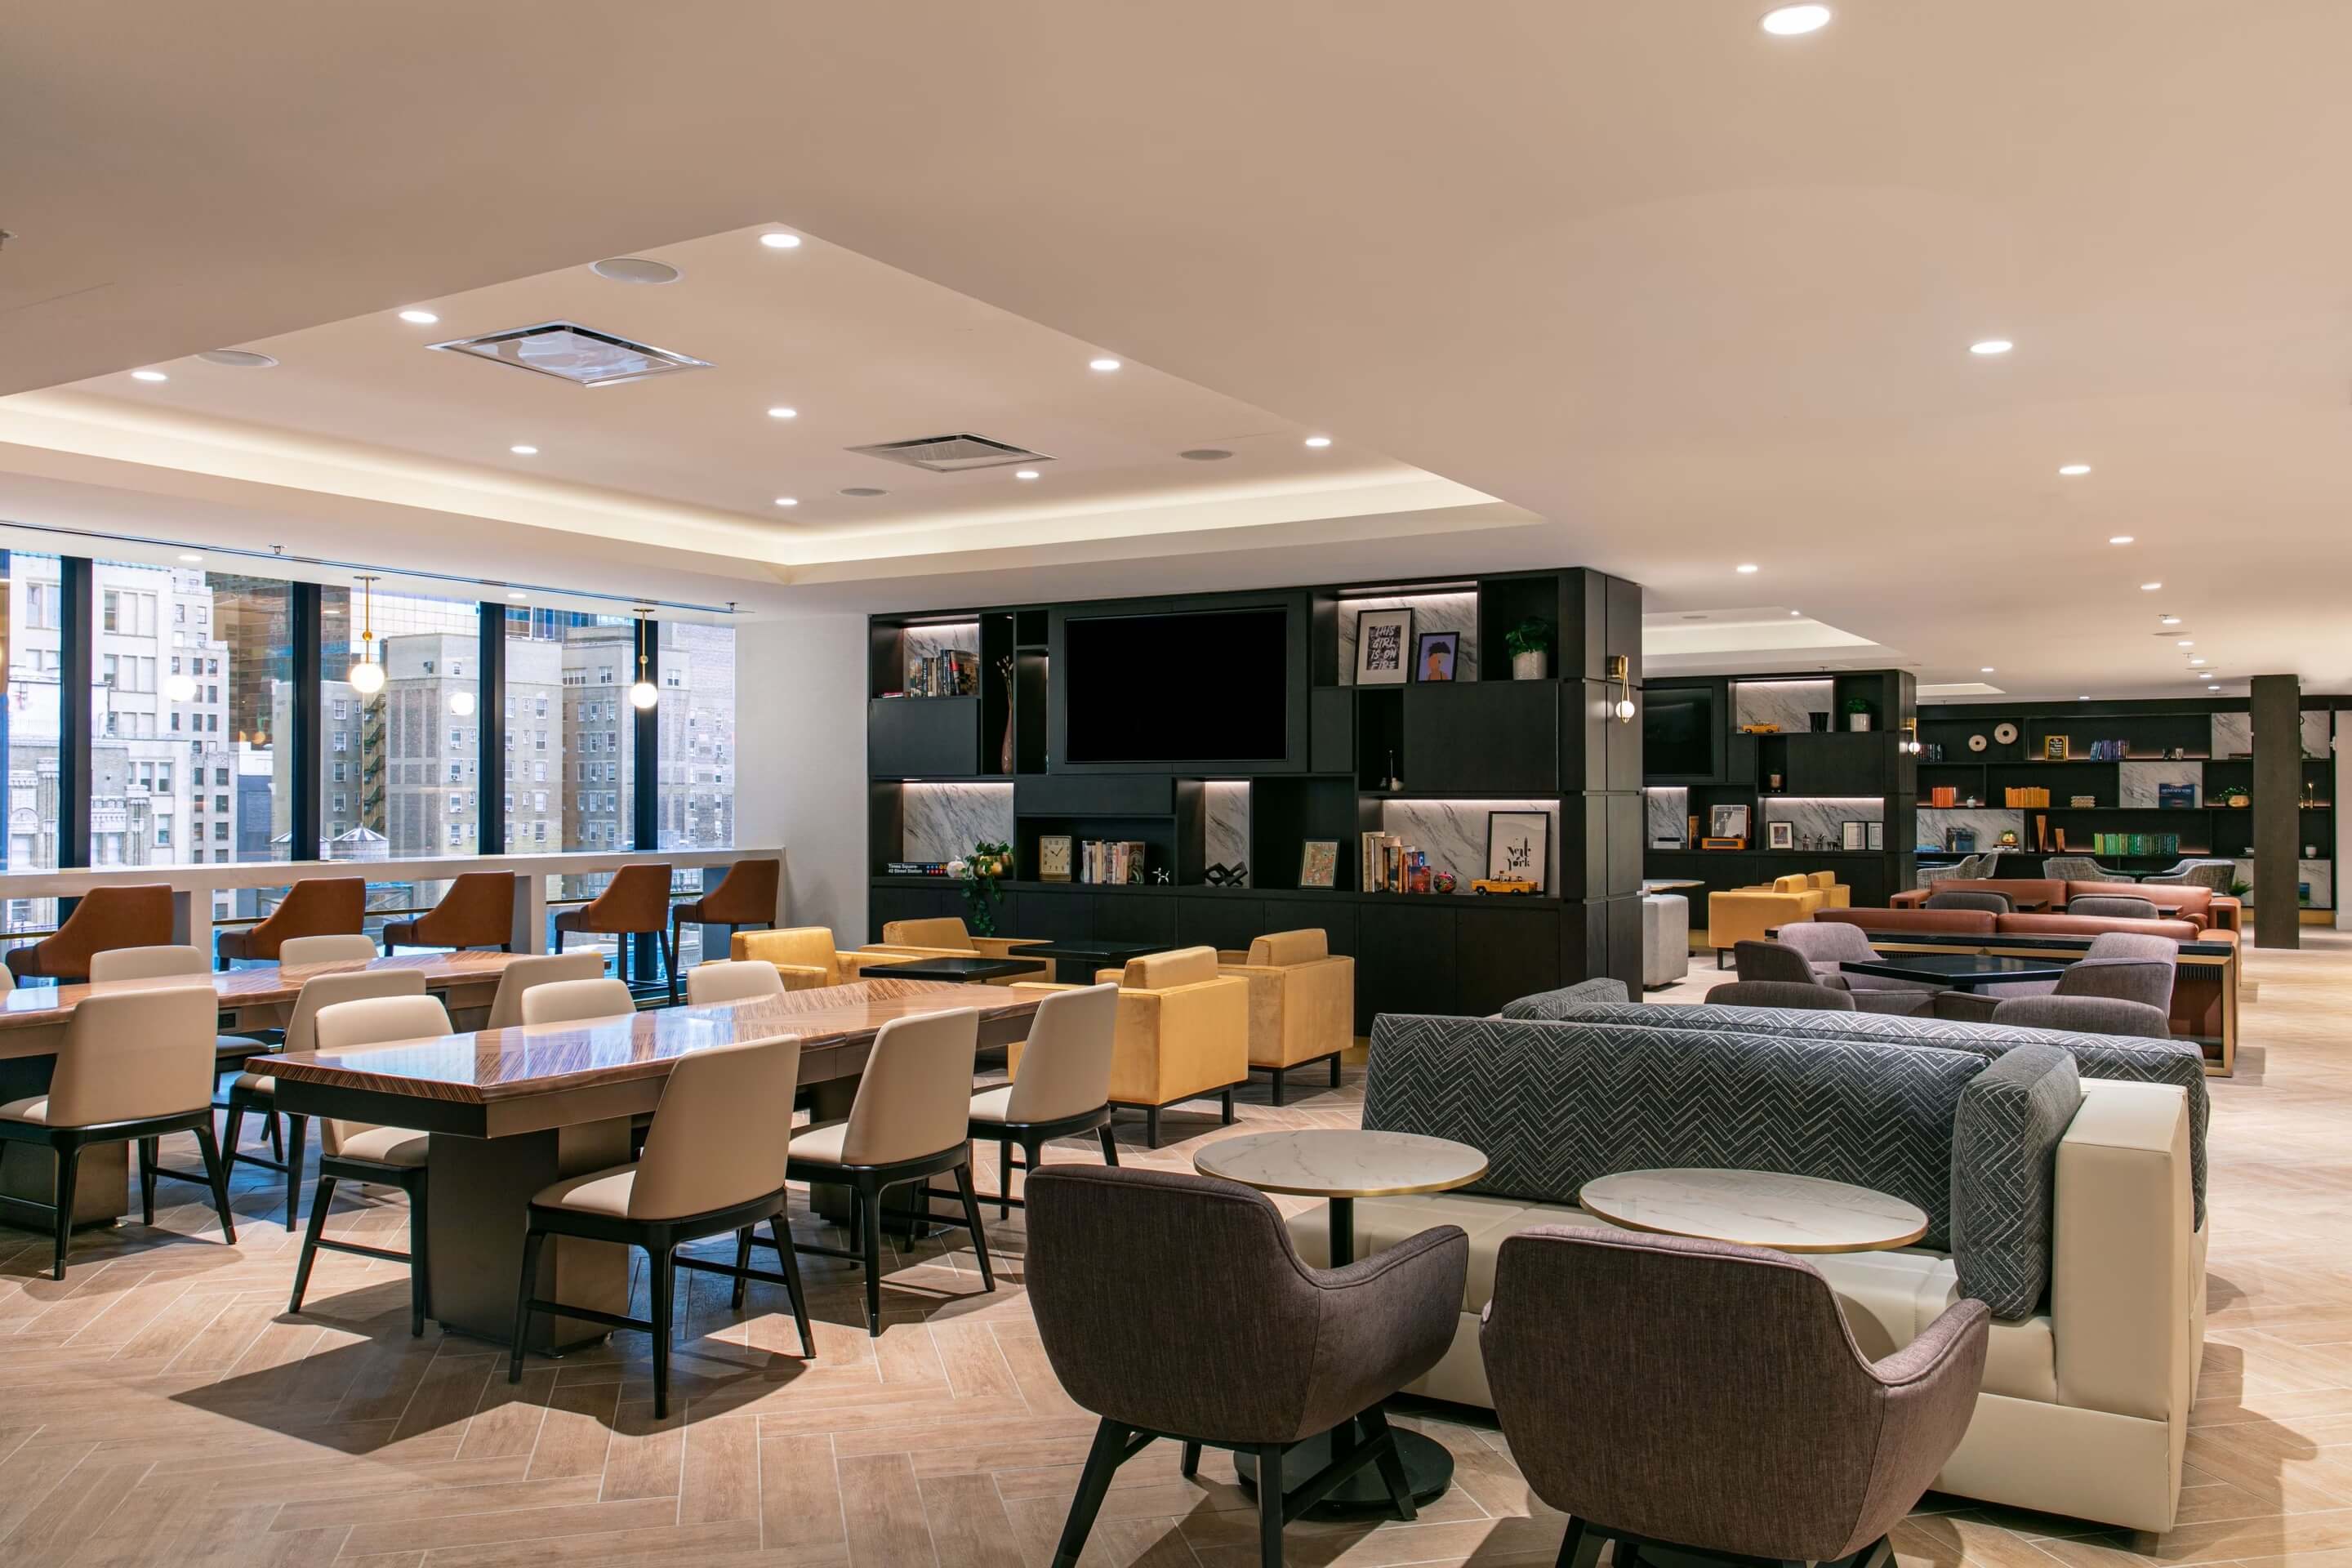 New York Marriott Marquis Executive Club Lounge Seating Area